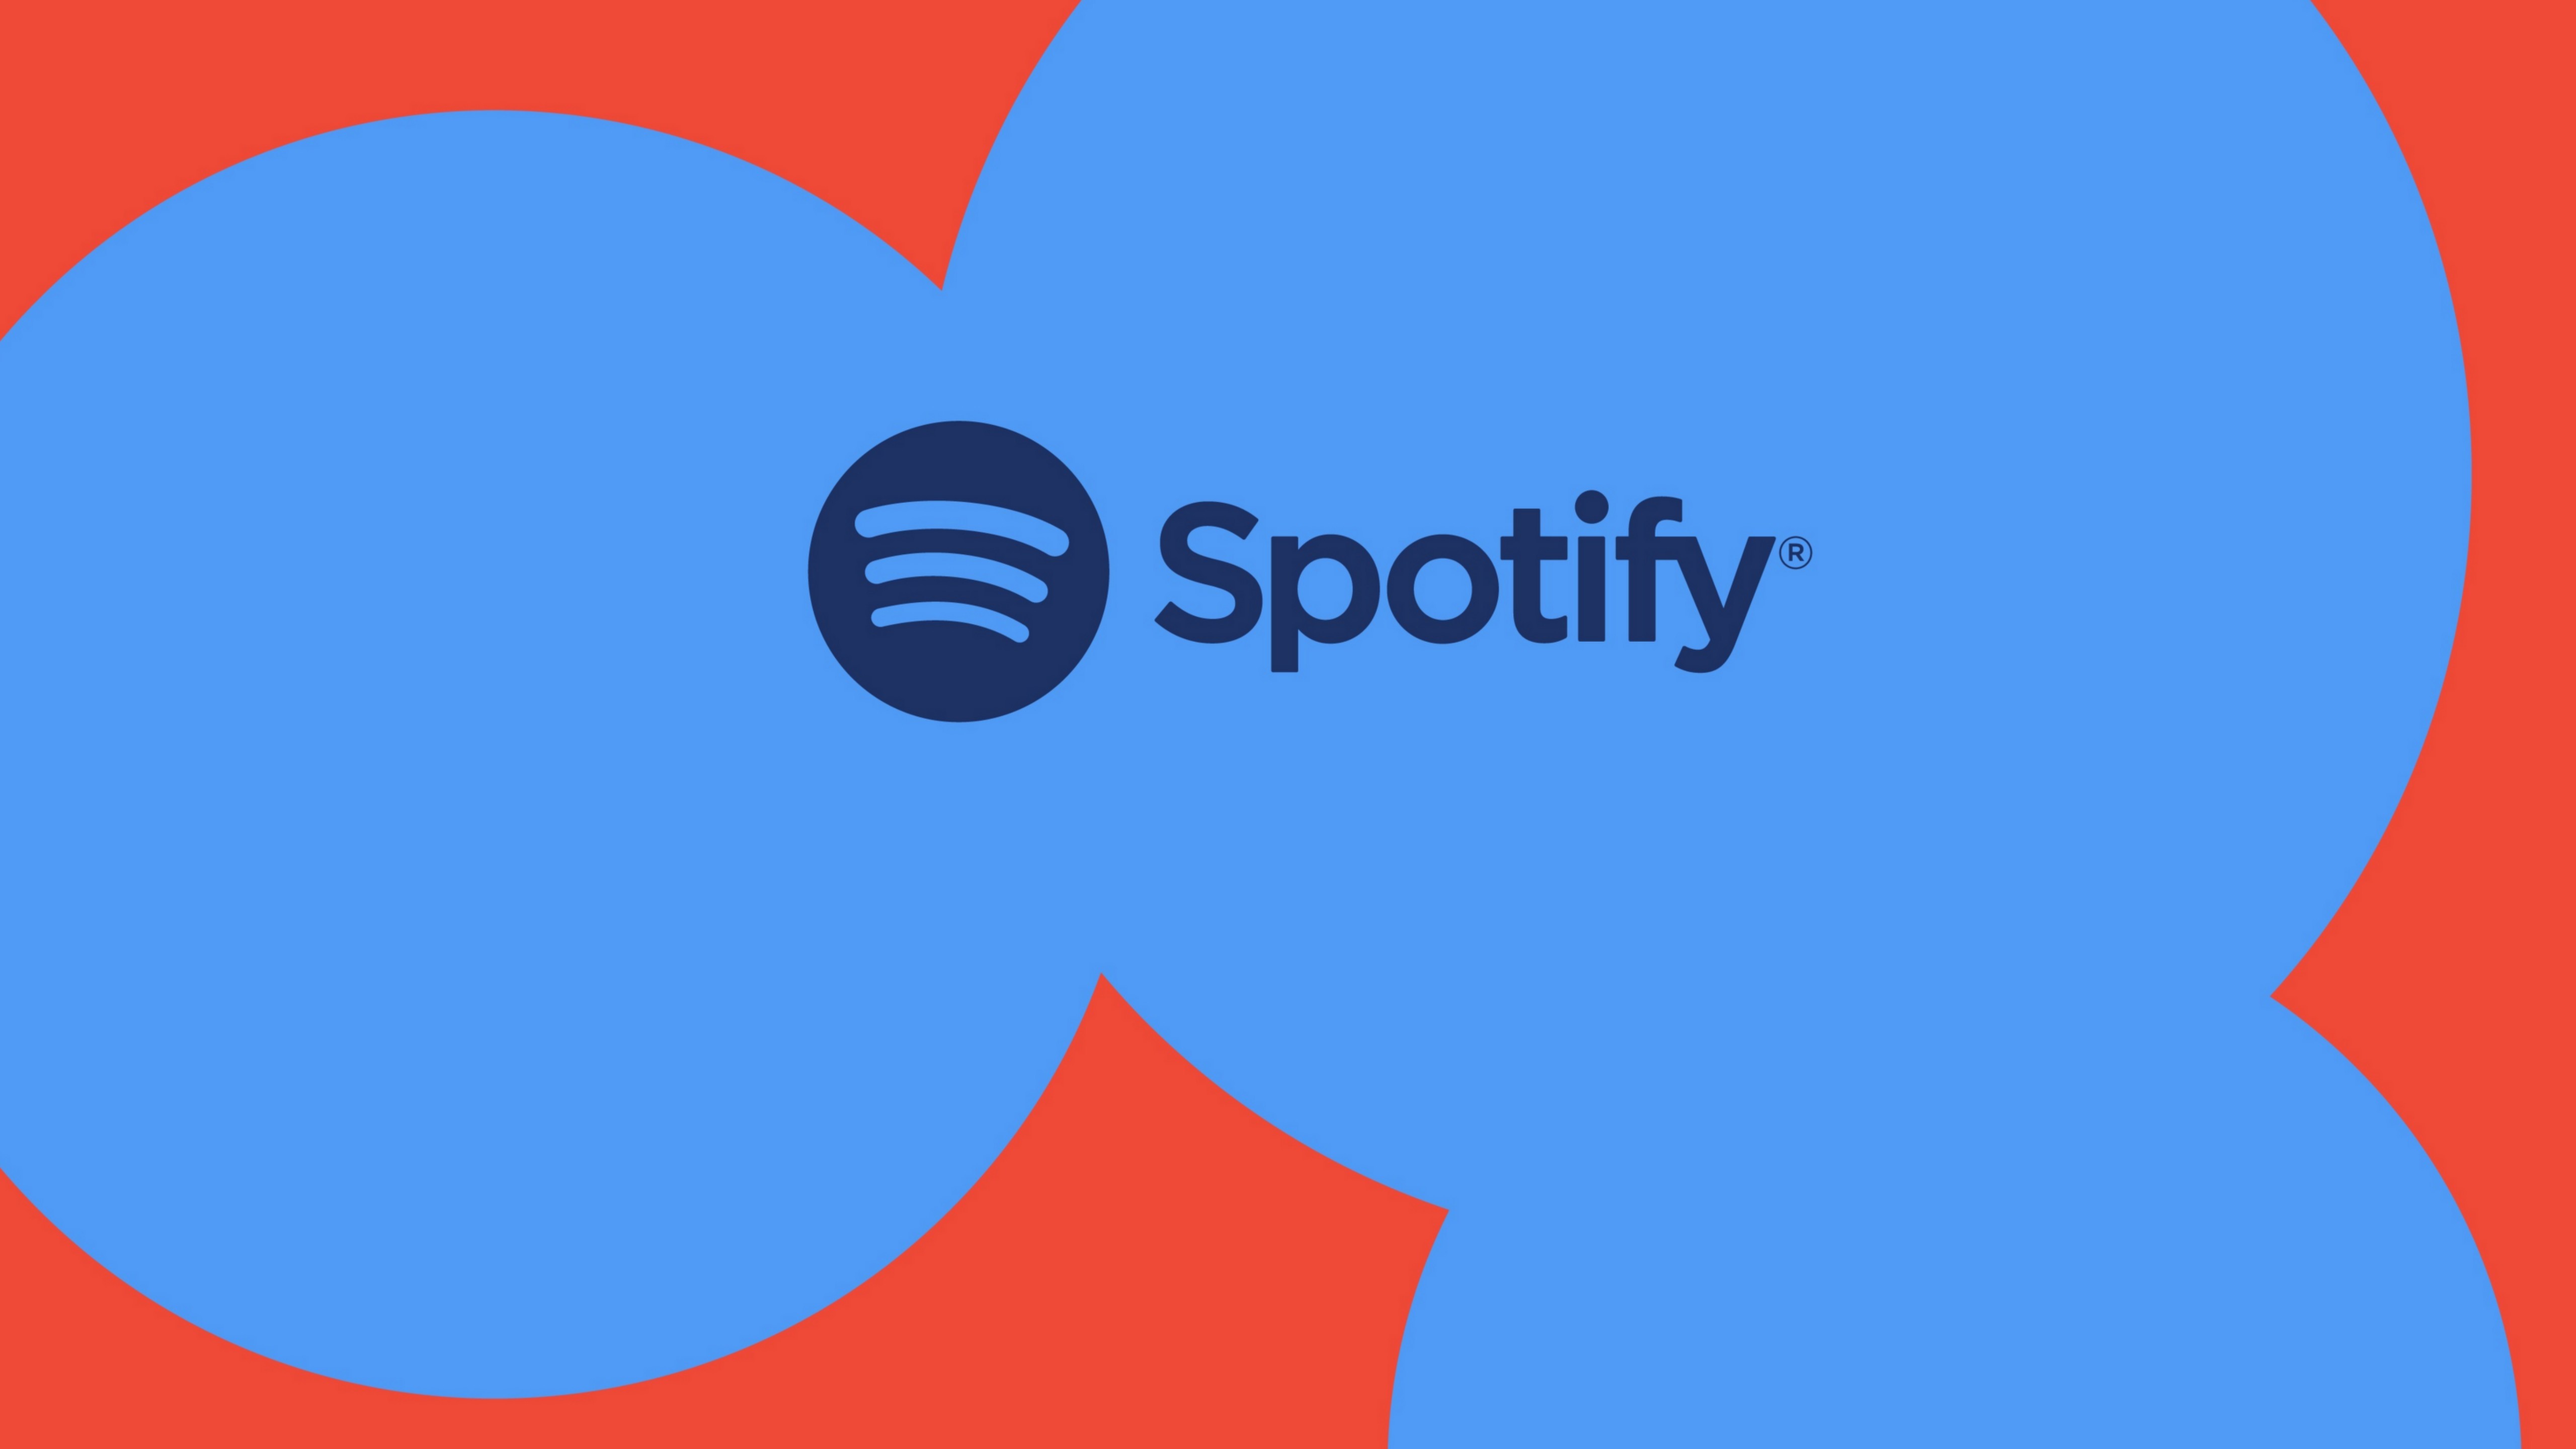 How to download music and podcasts from Spotify